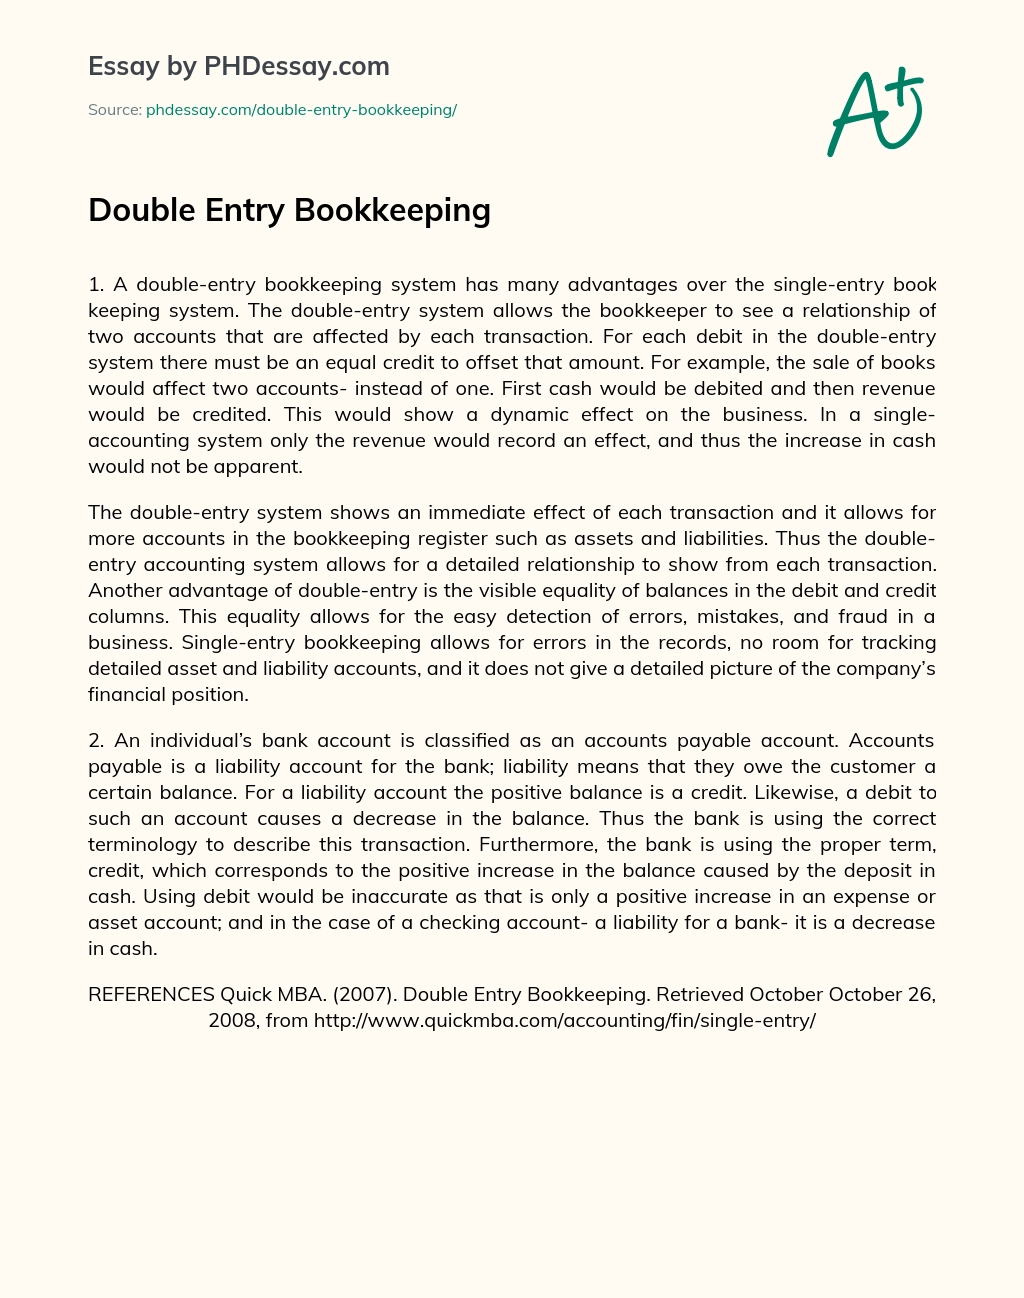 Double Entry Bookkeeping essay